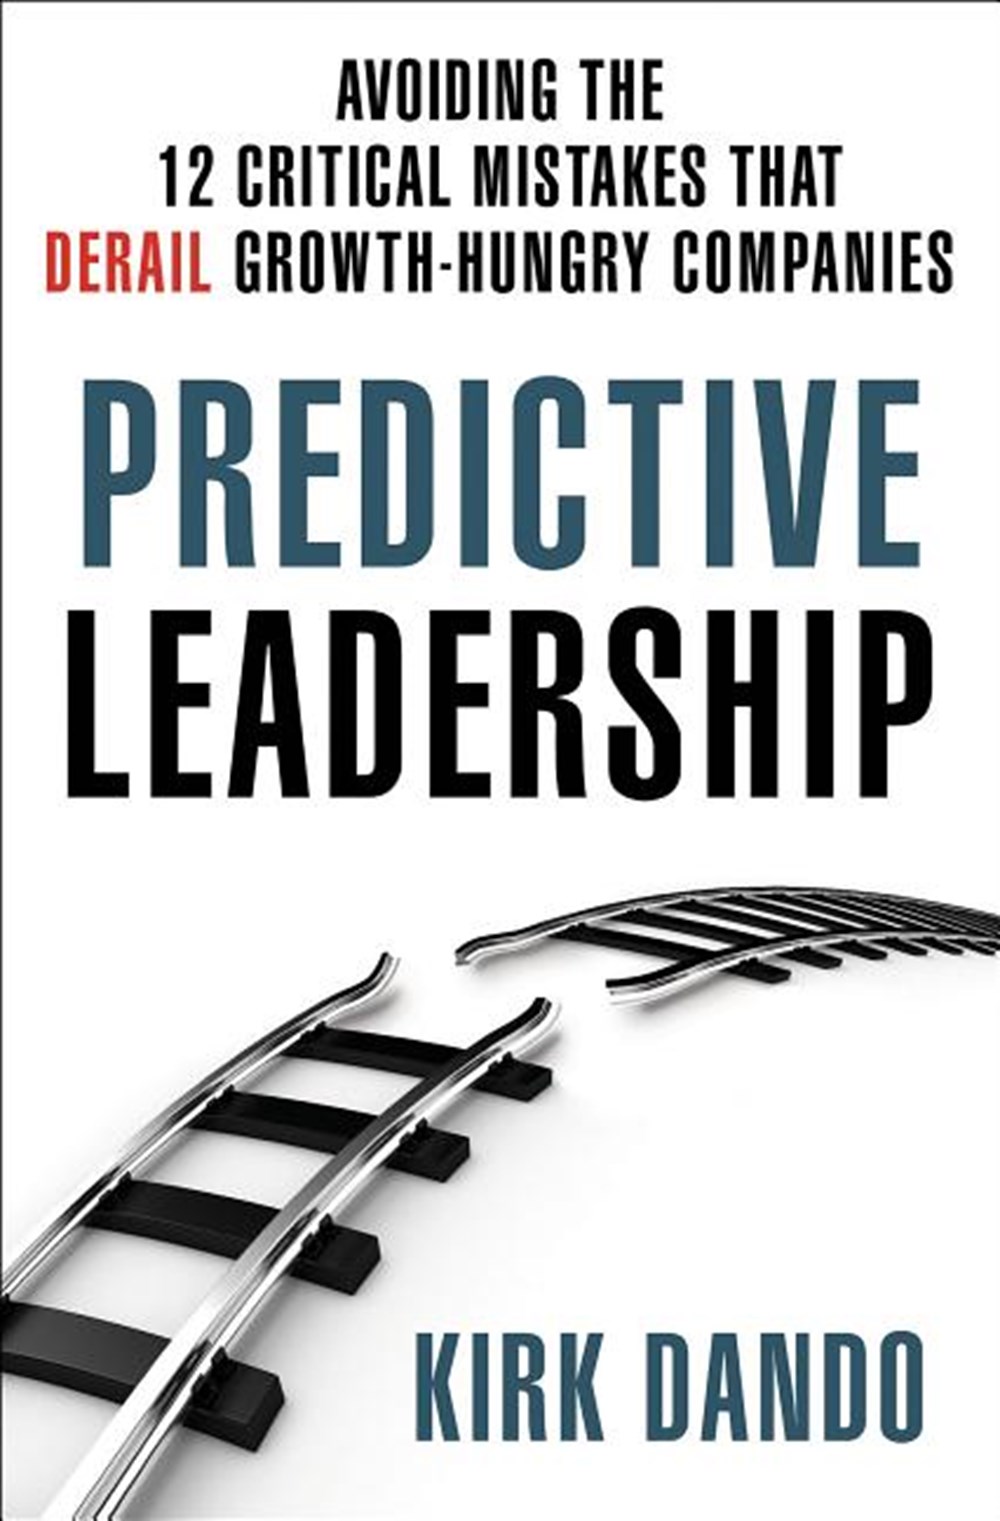 Predictive Leadership Avoiding the 12 Critical Mistakes That Derail Growth-Hungry Companies